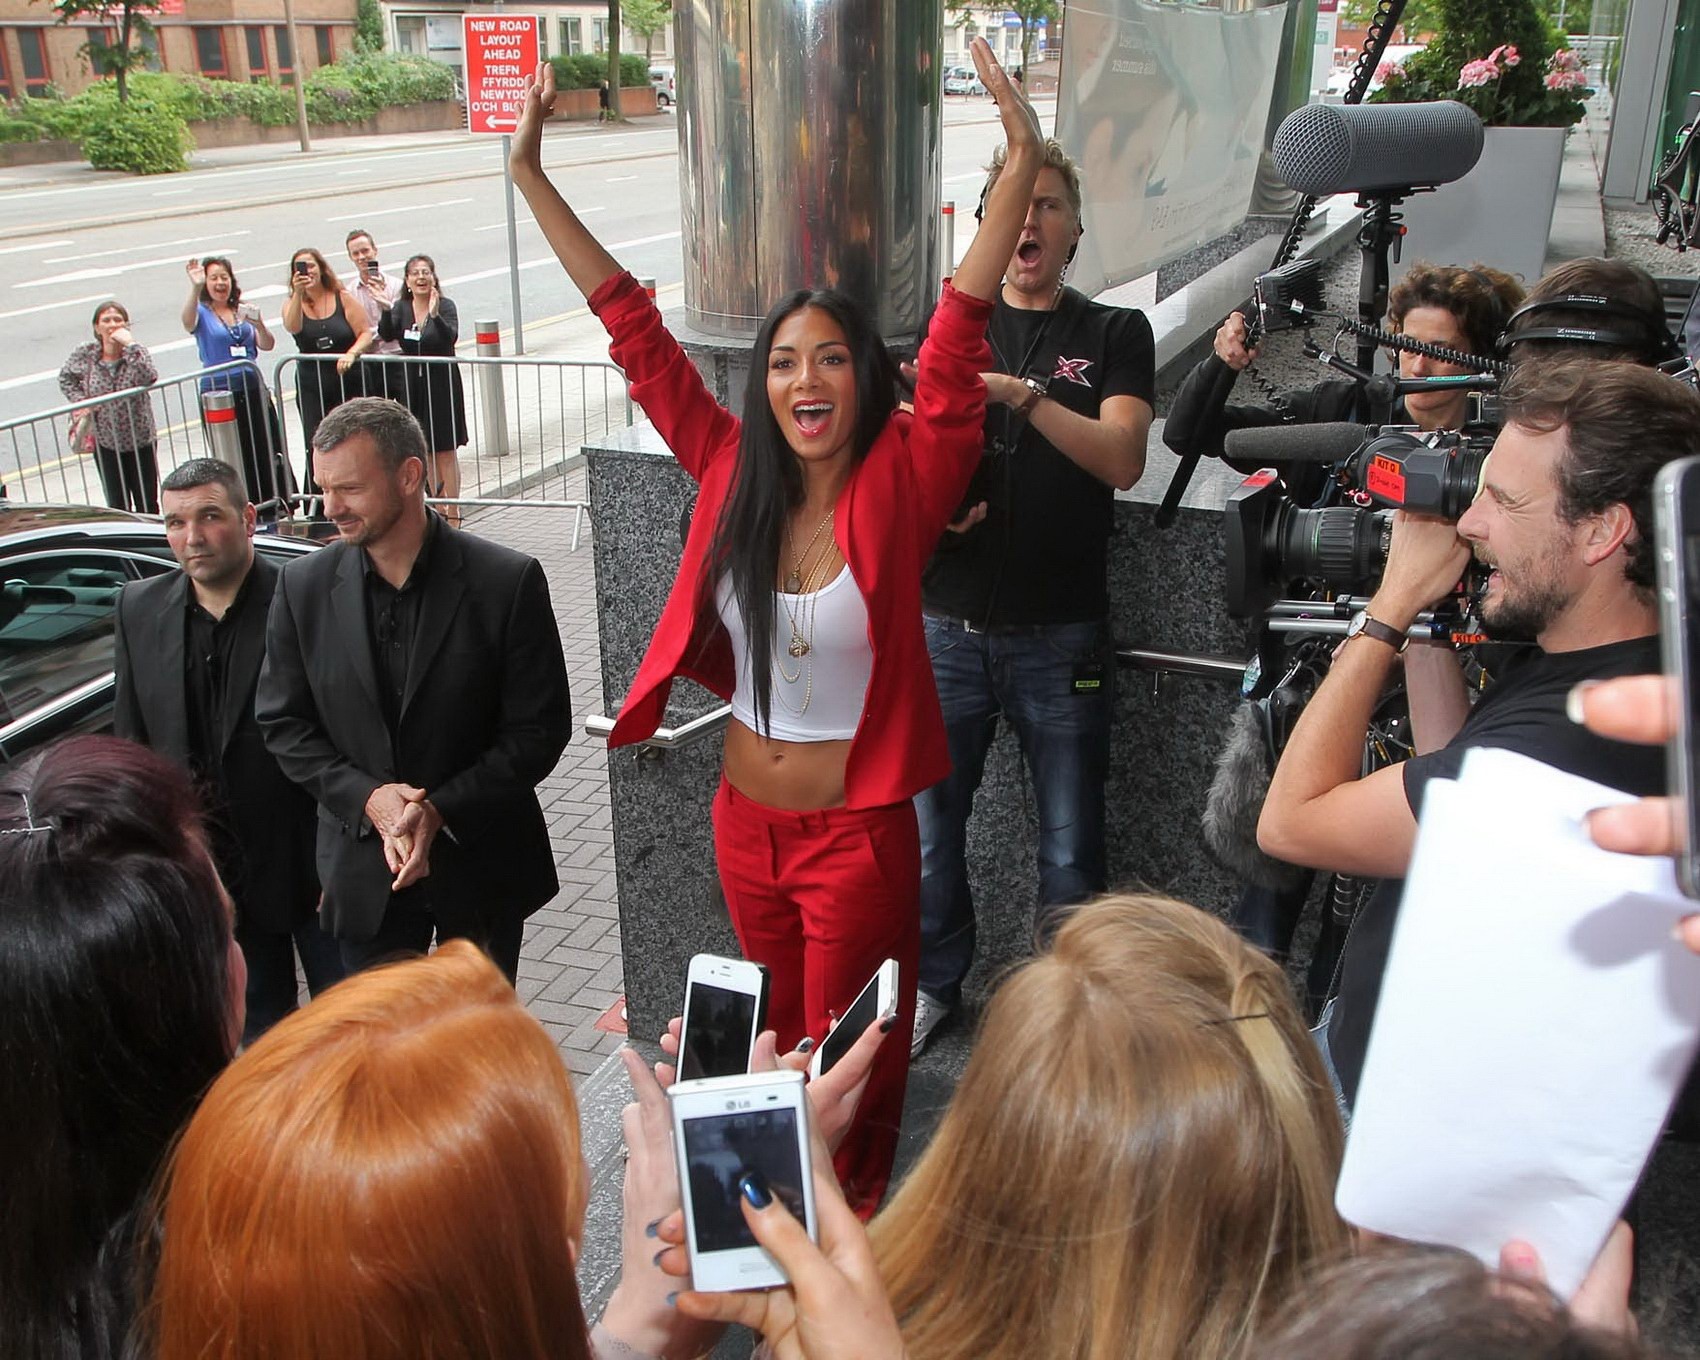 Nicole Scherzinger braless in a hot red suit and white belly top while arriving  #75226253